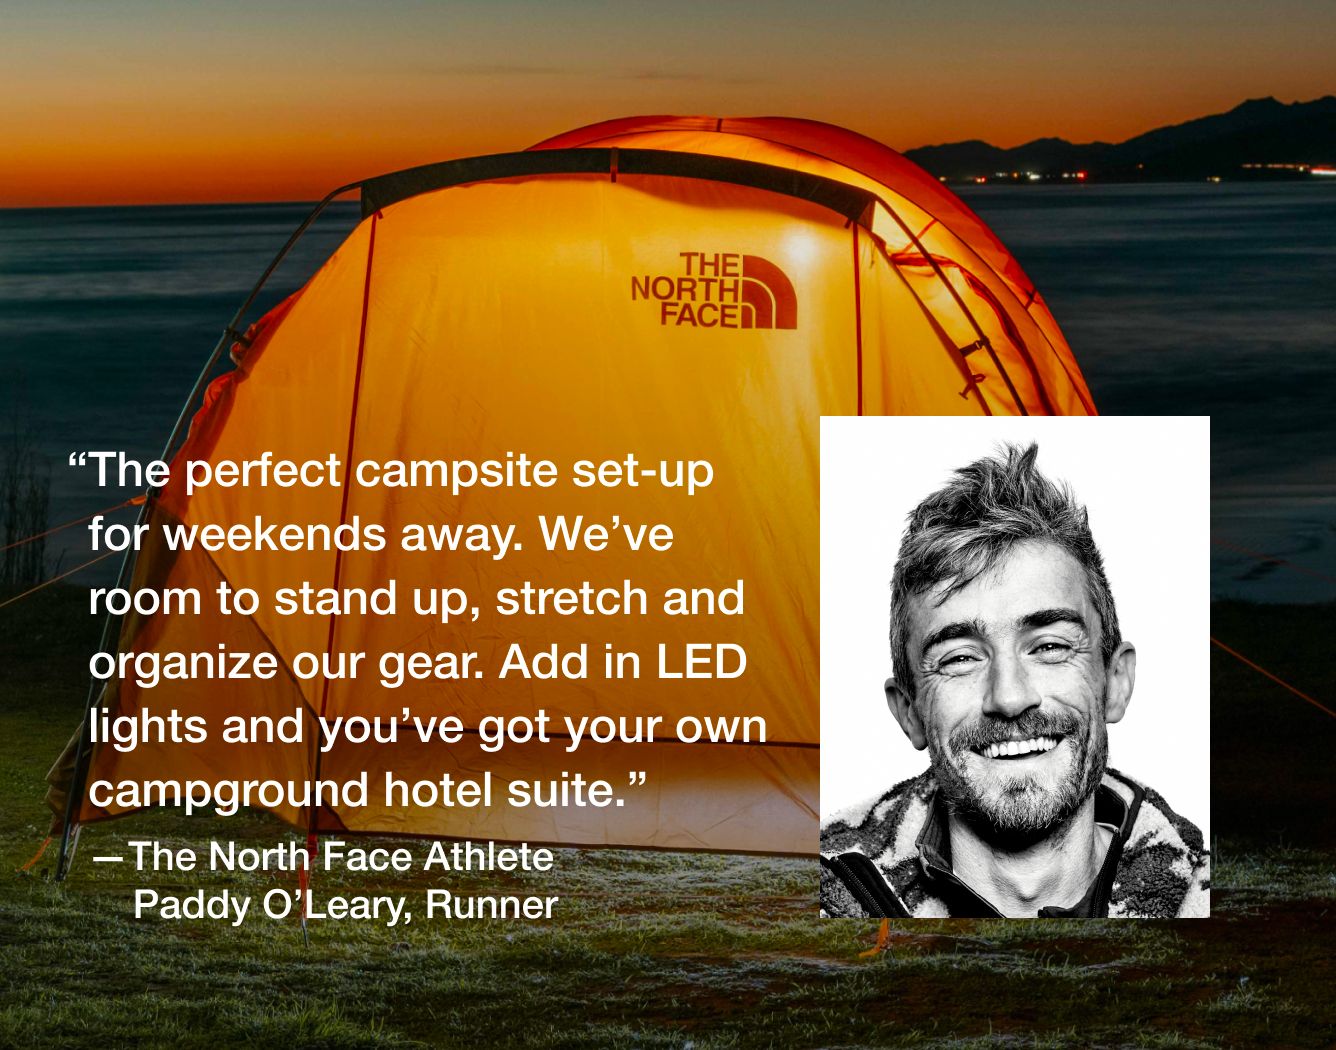  “The perfect set-up for weekends away. We've room to stand up, stretch and organize our gear. Add in LED lights and you've got your own campground hotel suite.”   —The North Face Athlete Paddy O’Leary, Runner 